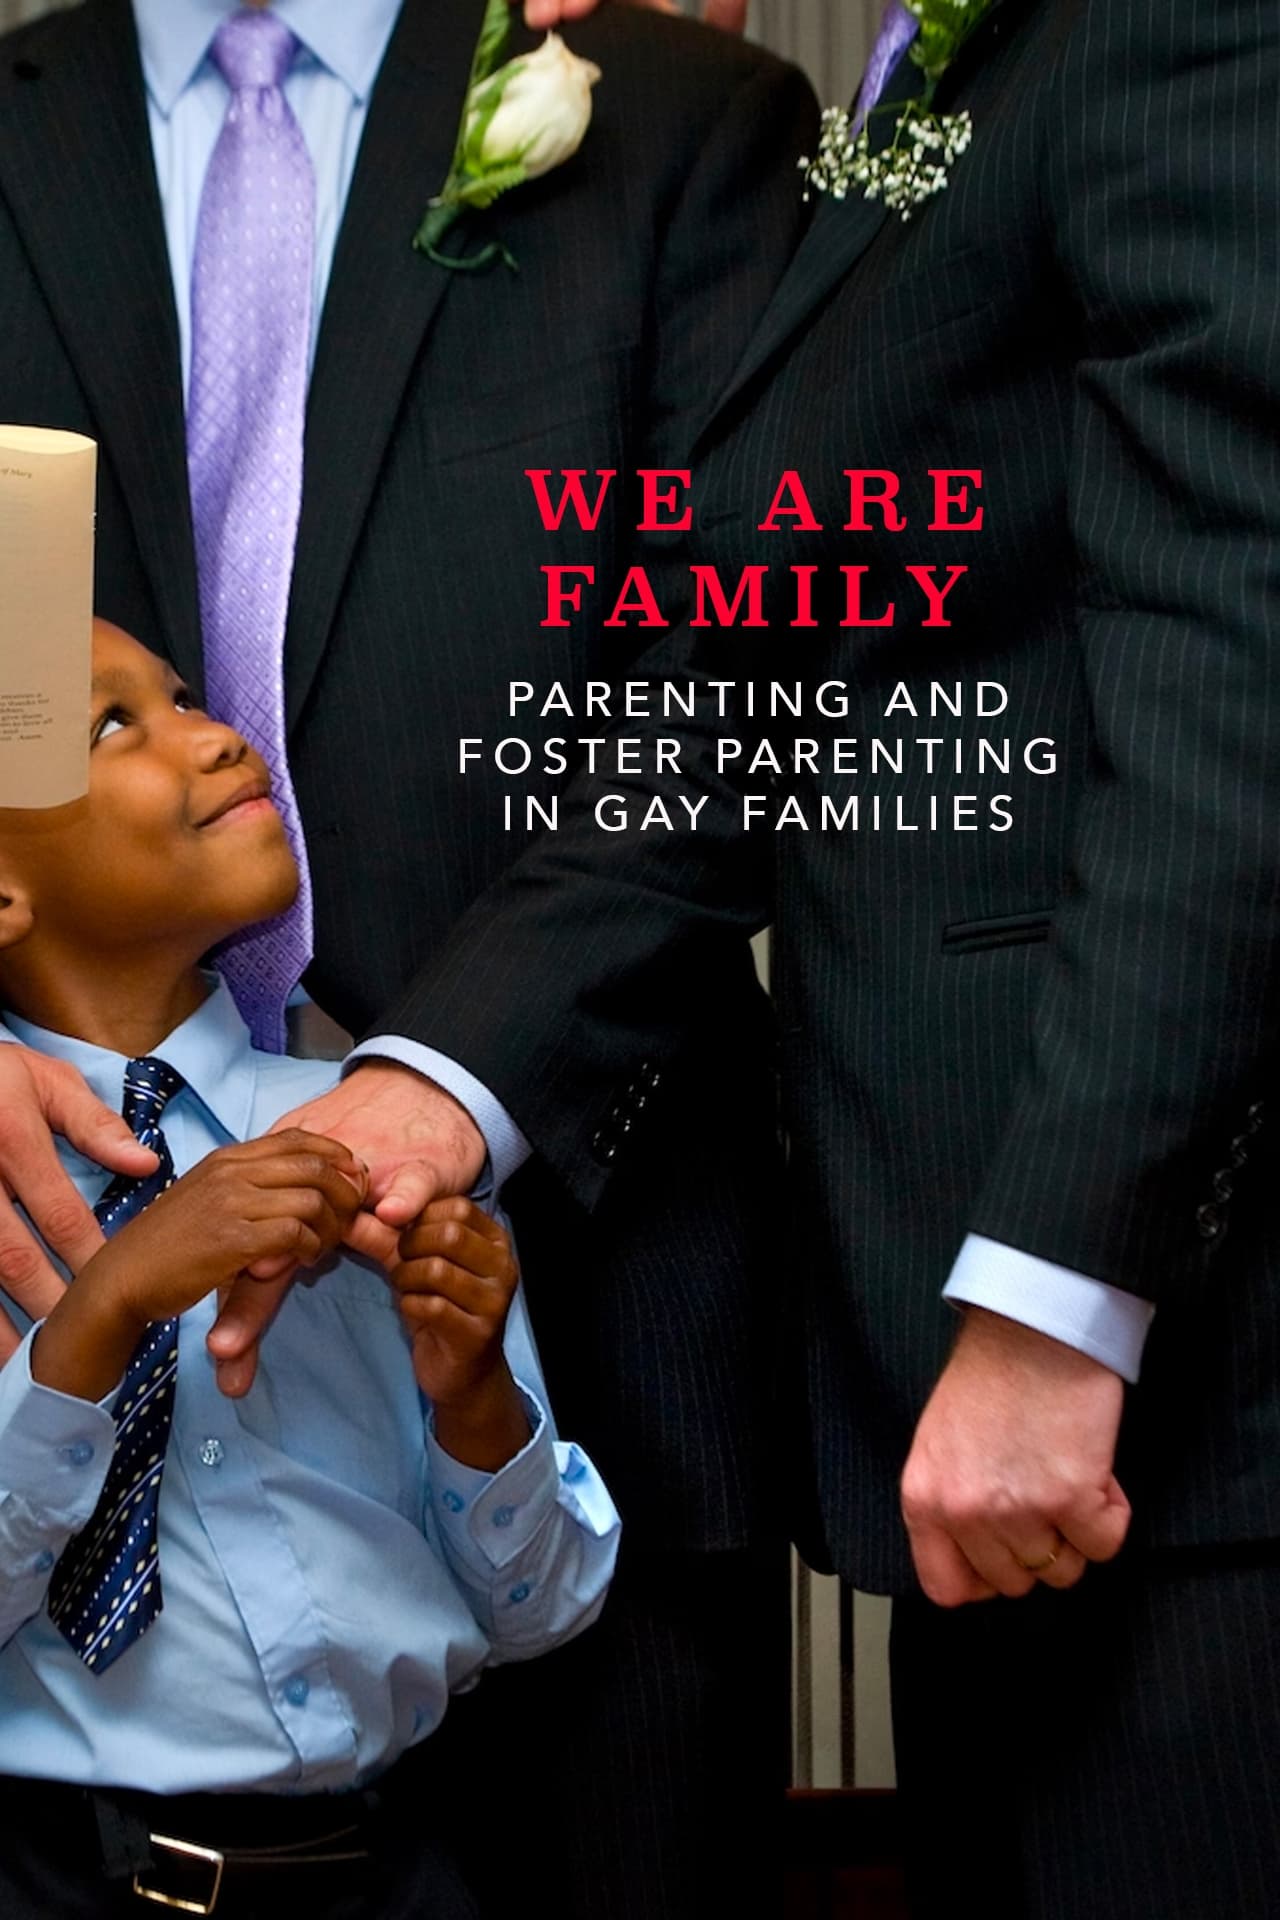 We Are Family: Parenting and Foster Parenting in Gay Families